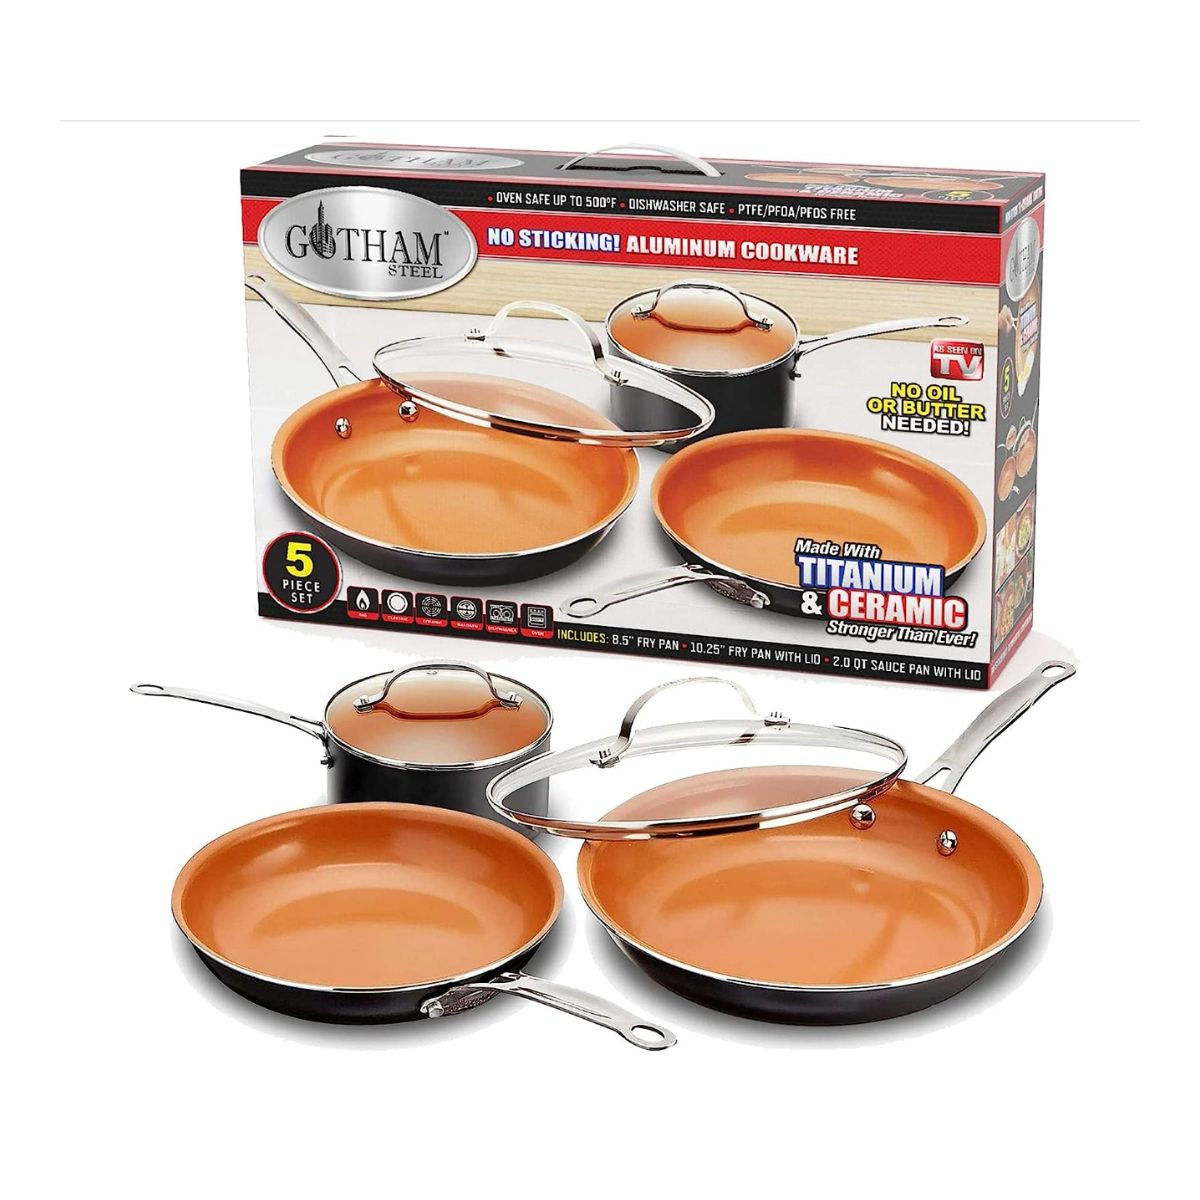 Gotham steel pan box with two frying pans and one pot